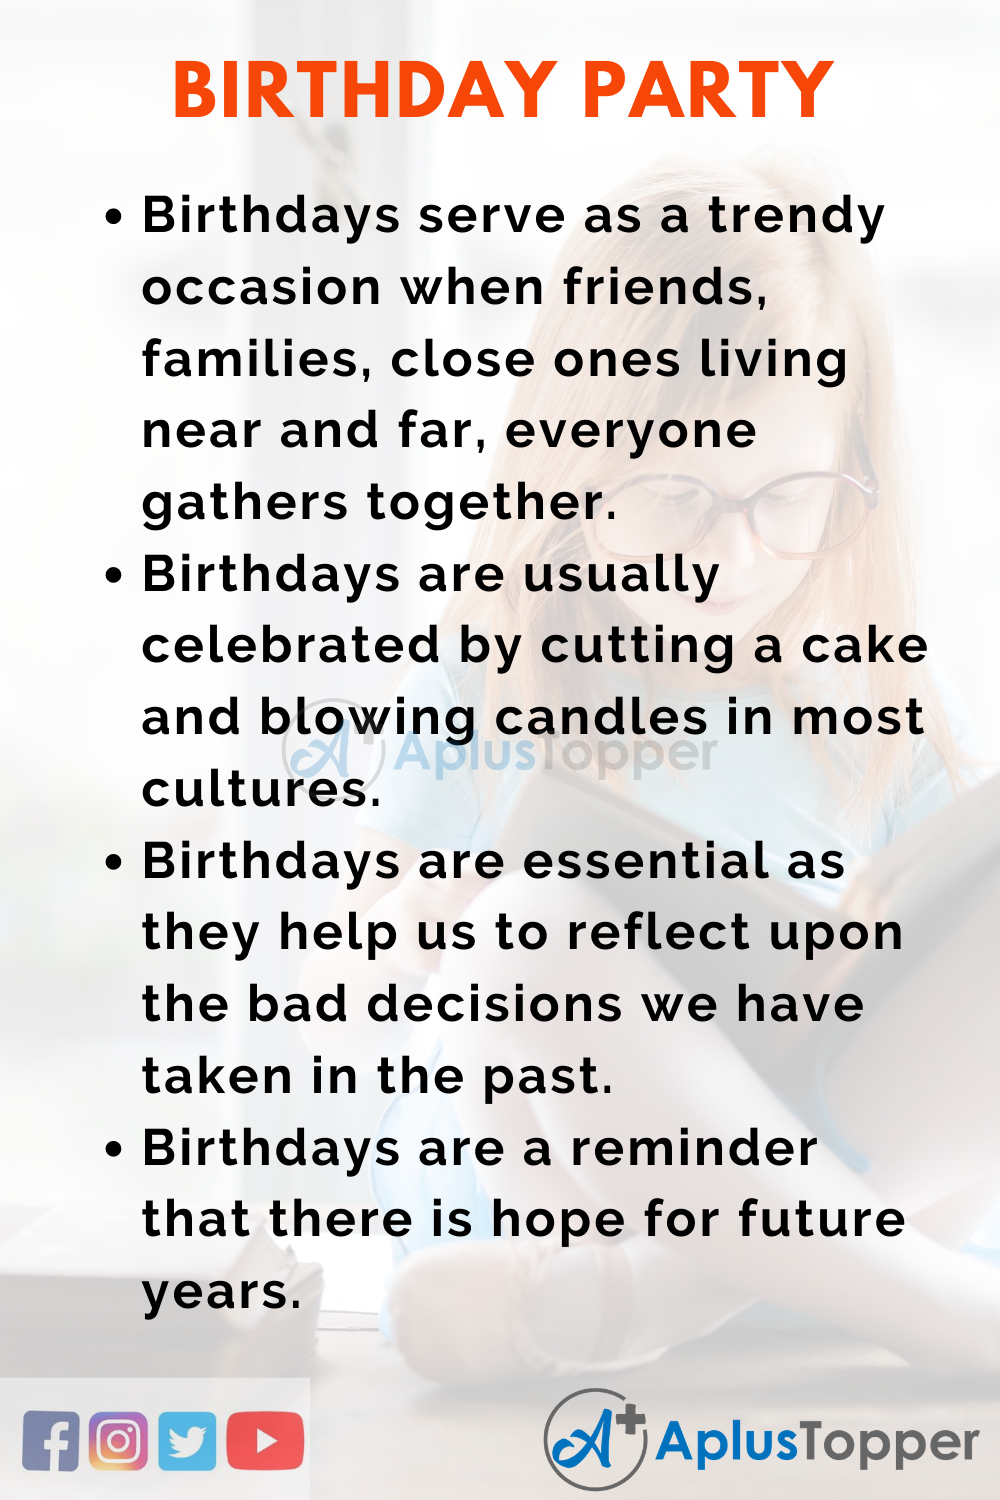 Short Welcome Speech for A Birthday Party 150 Words In English